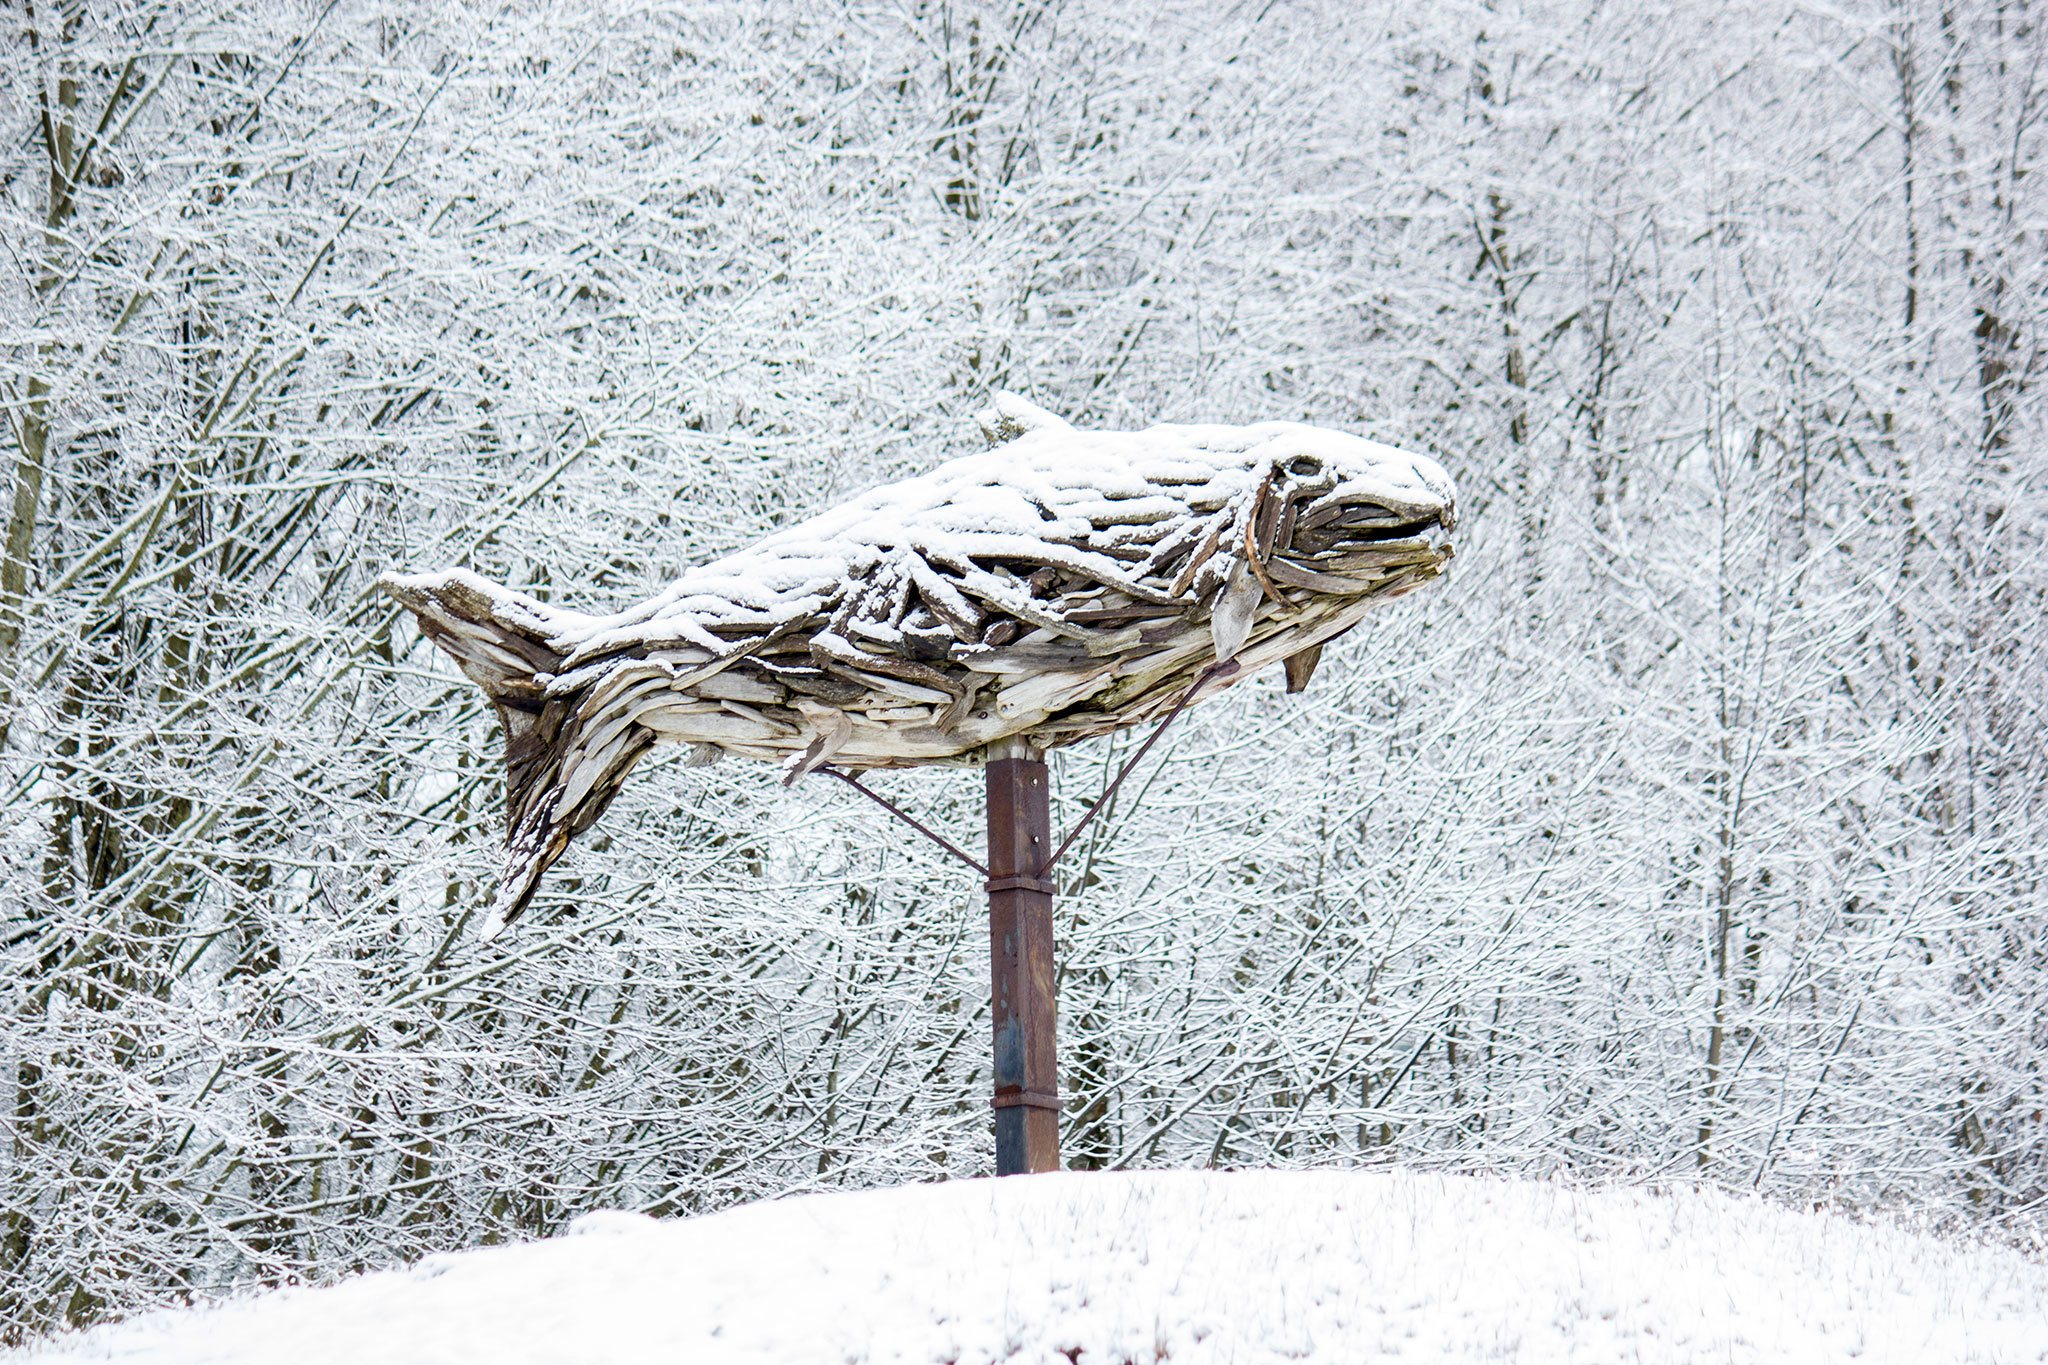 Snow covers the large driftwood fish sculpture at Poulsbo’s Fish Park, Feb. 6. (Sophie Bonomi / Kitsap Daily News)